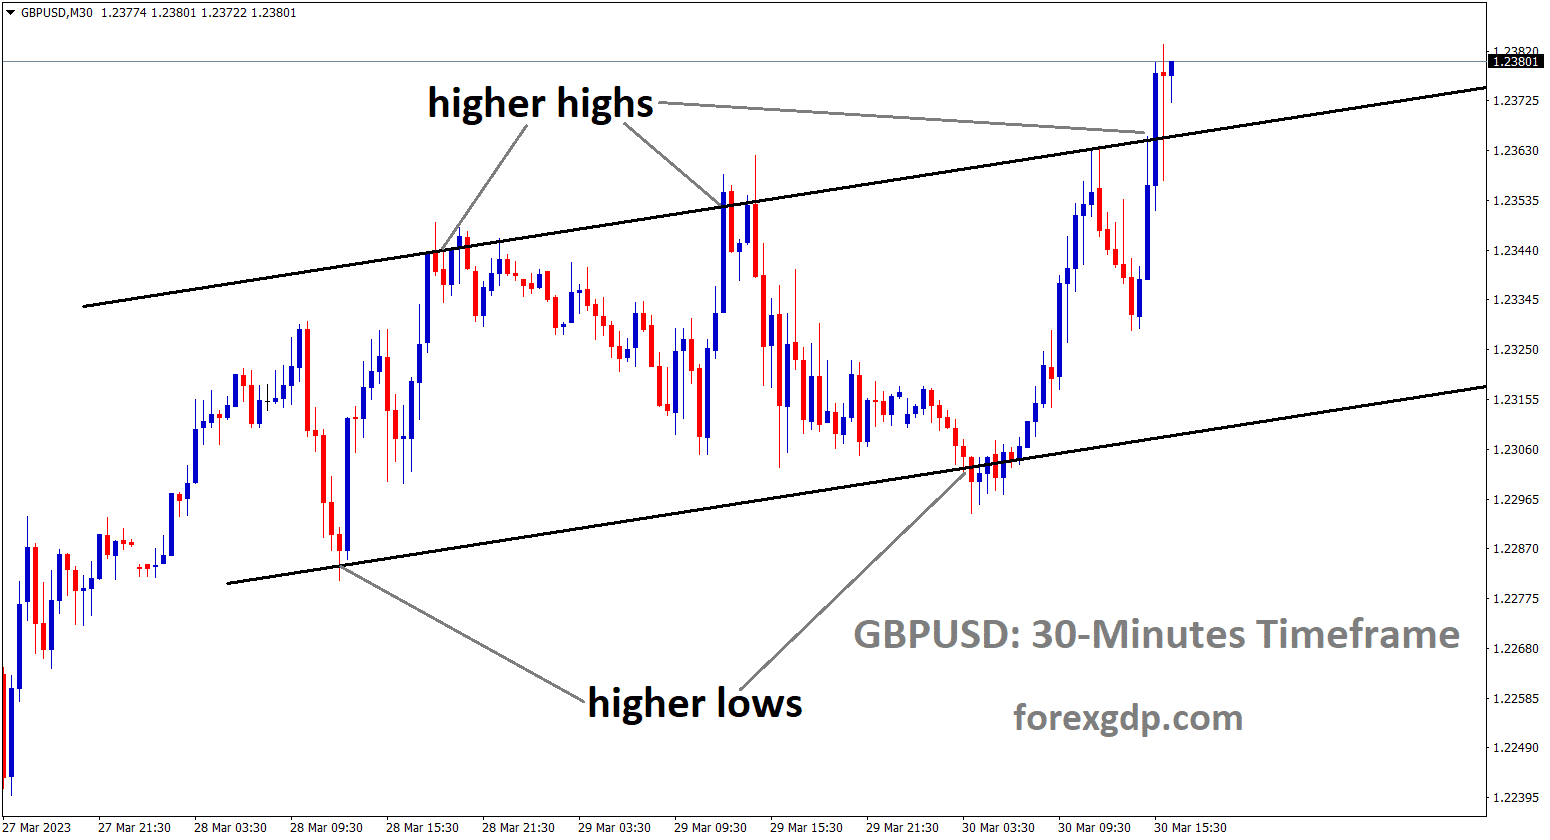 GBPUSD is moving an Ascending channel and the market has reached the higher high area of the channel.